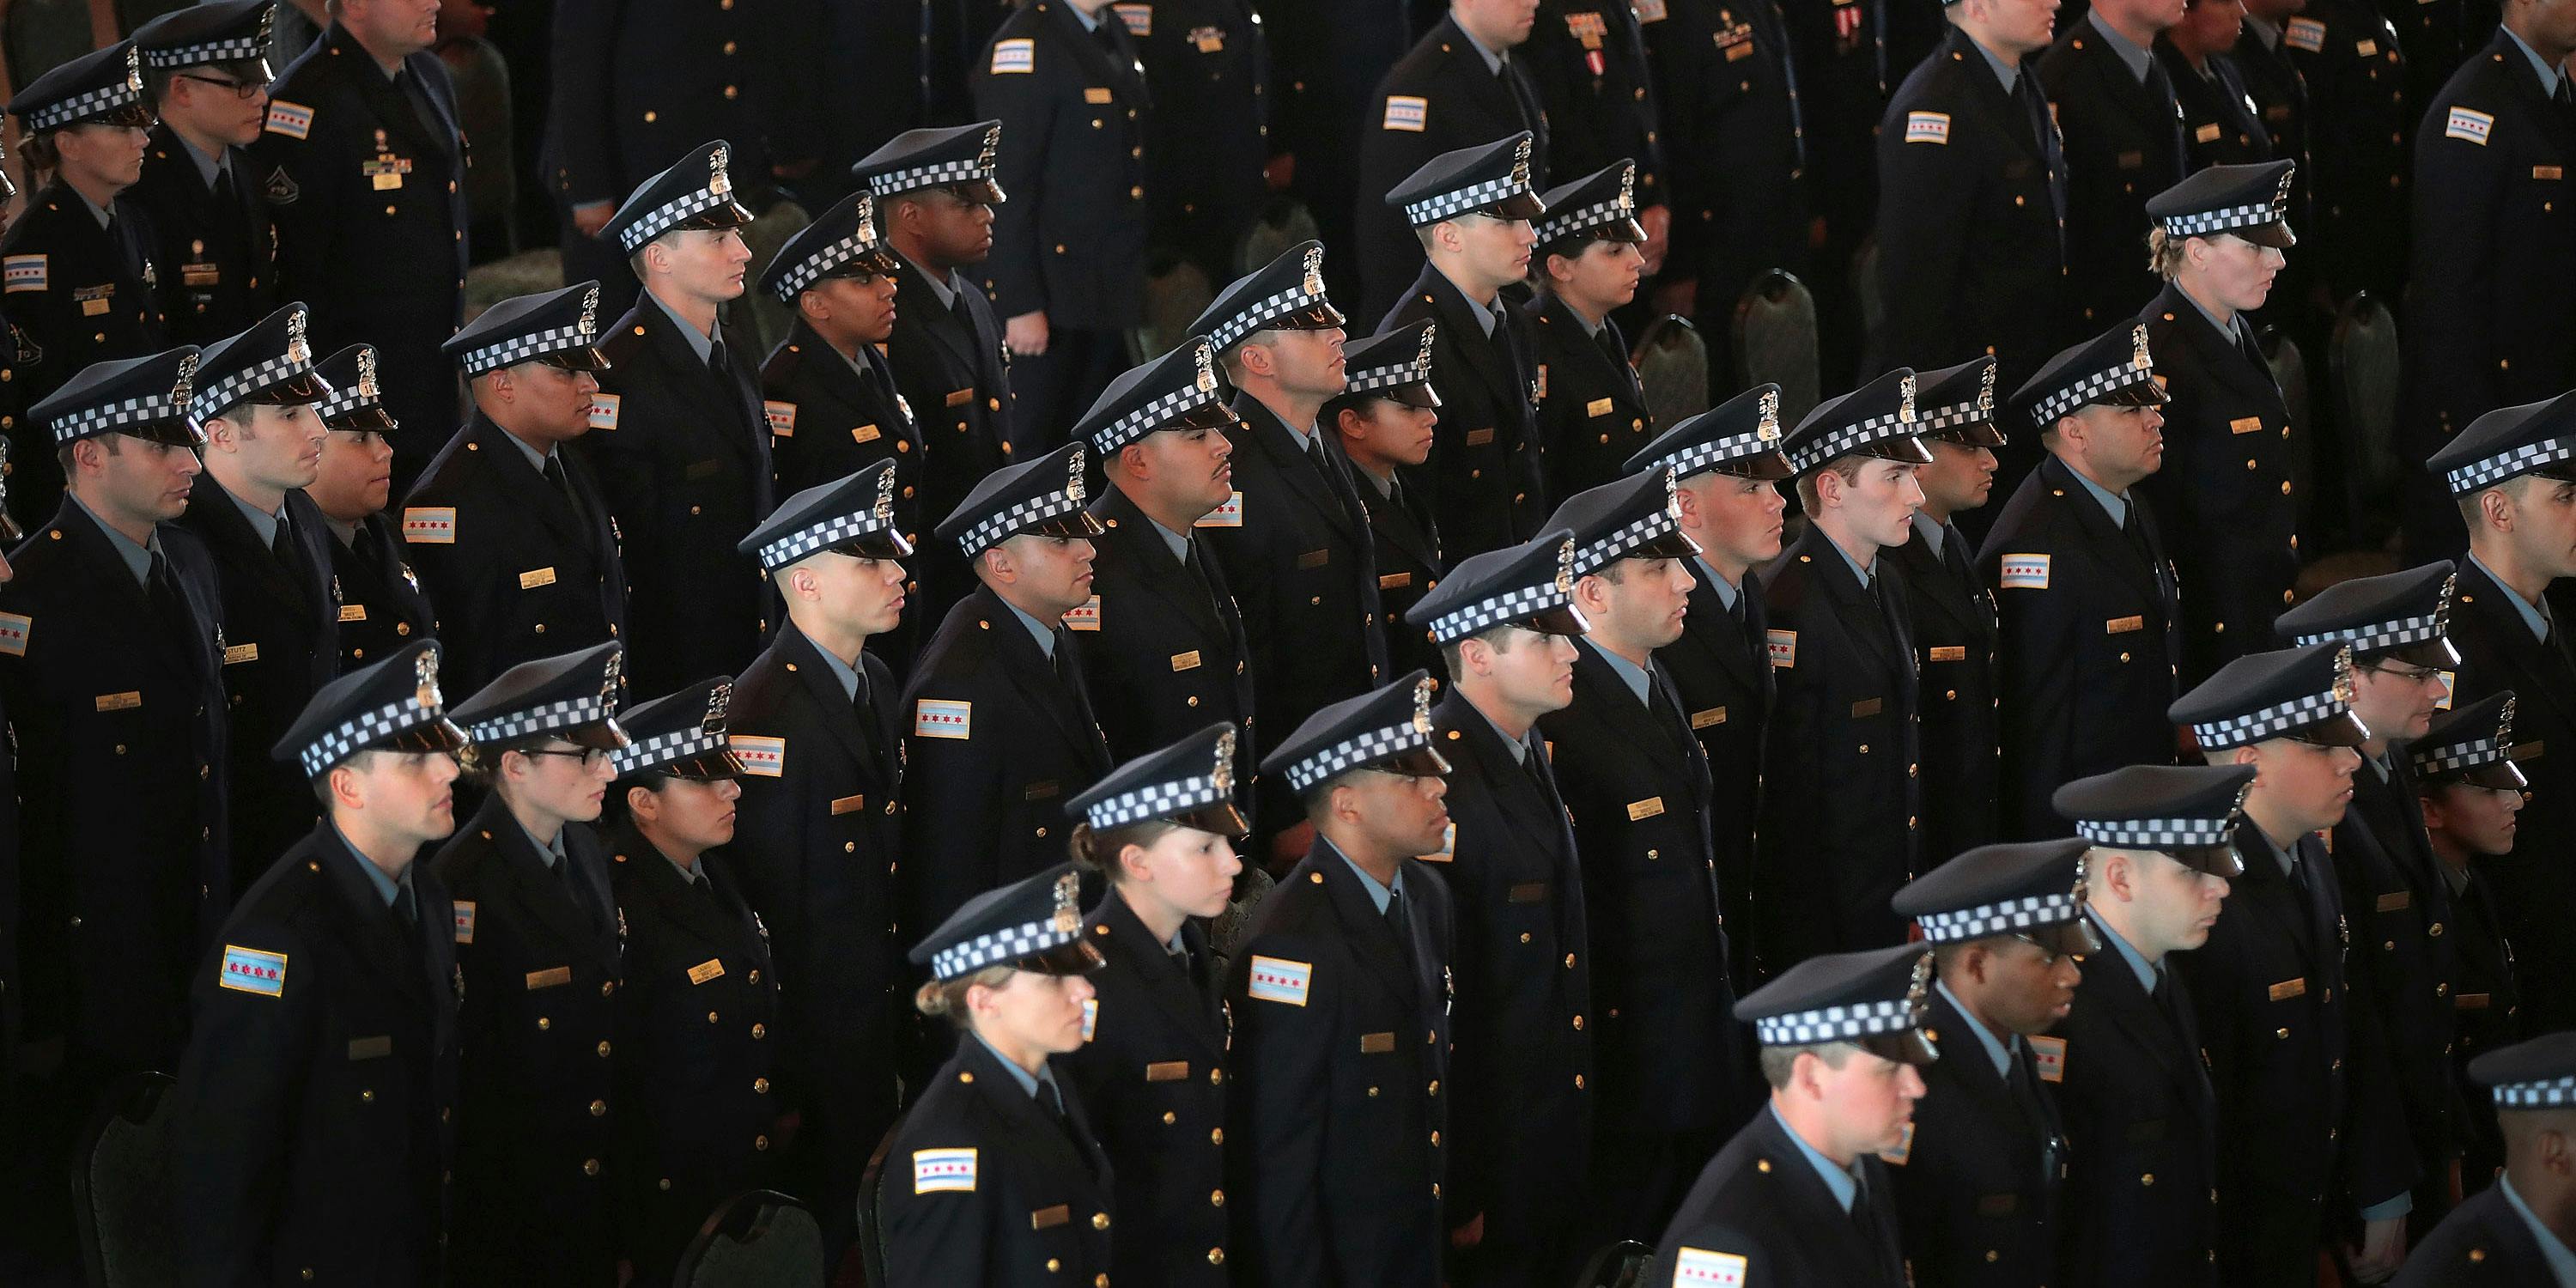 Chicago police officers attend a graduation and promotion ceremony in the Grand Ballroom on Navy Pier on June 15, 2017 in Chicago, Illinois. (Photo by Scott Olson/Getty Images)